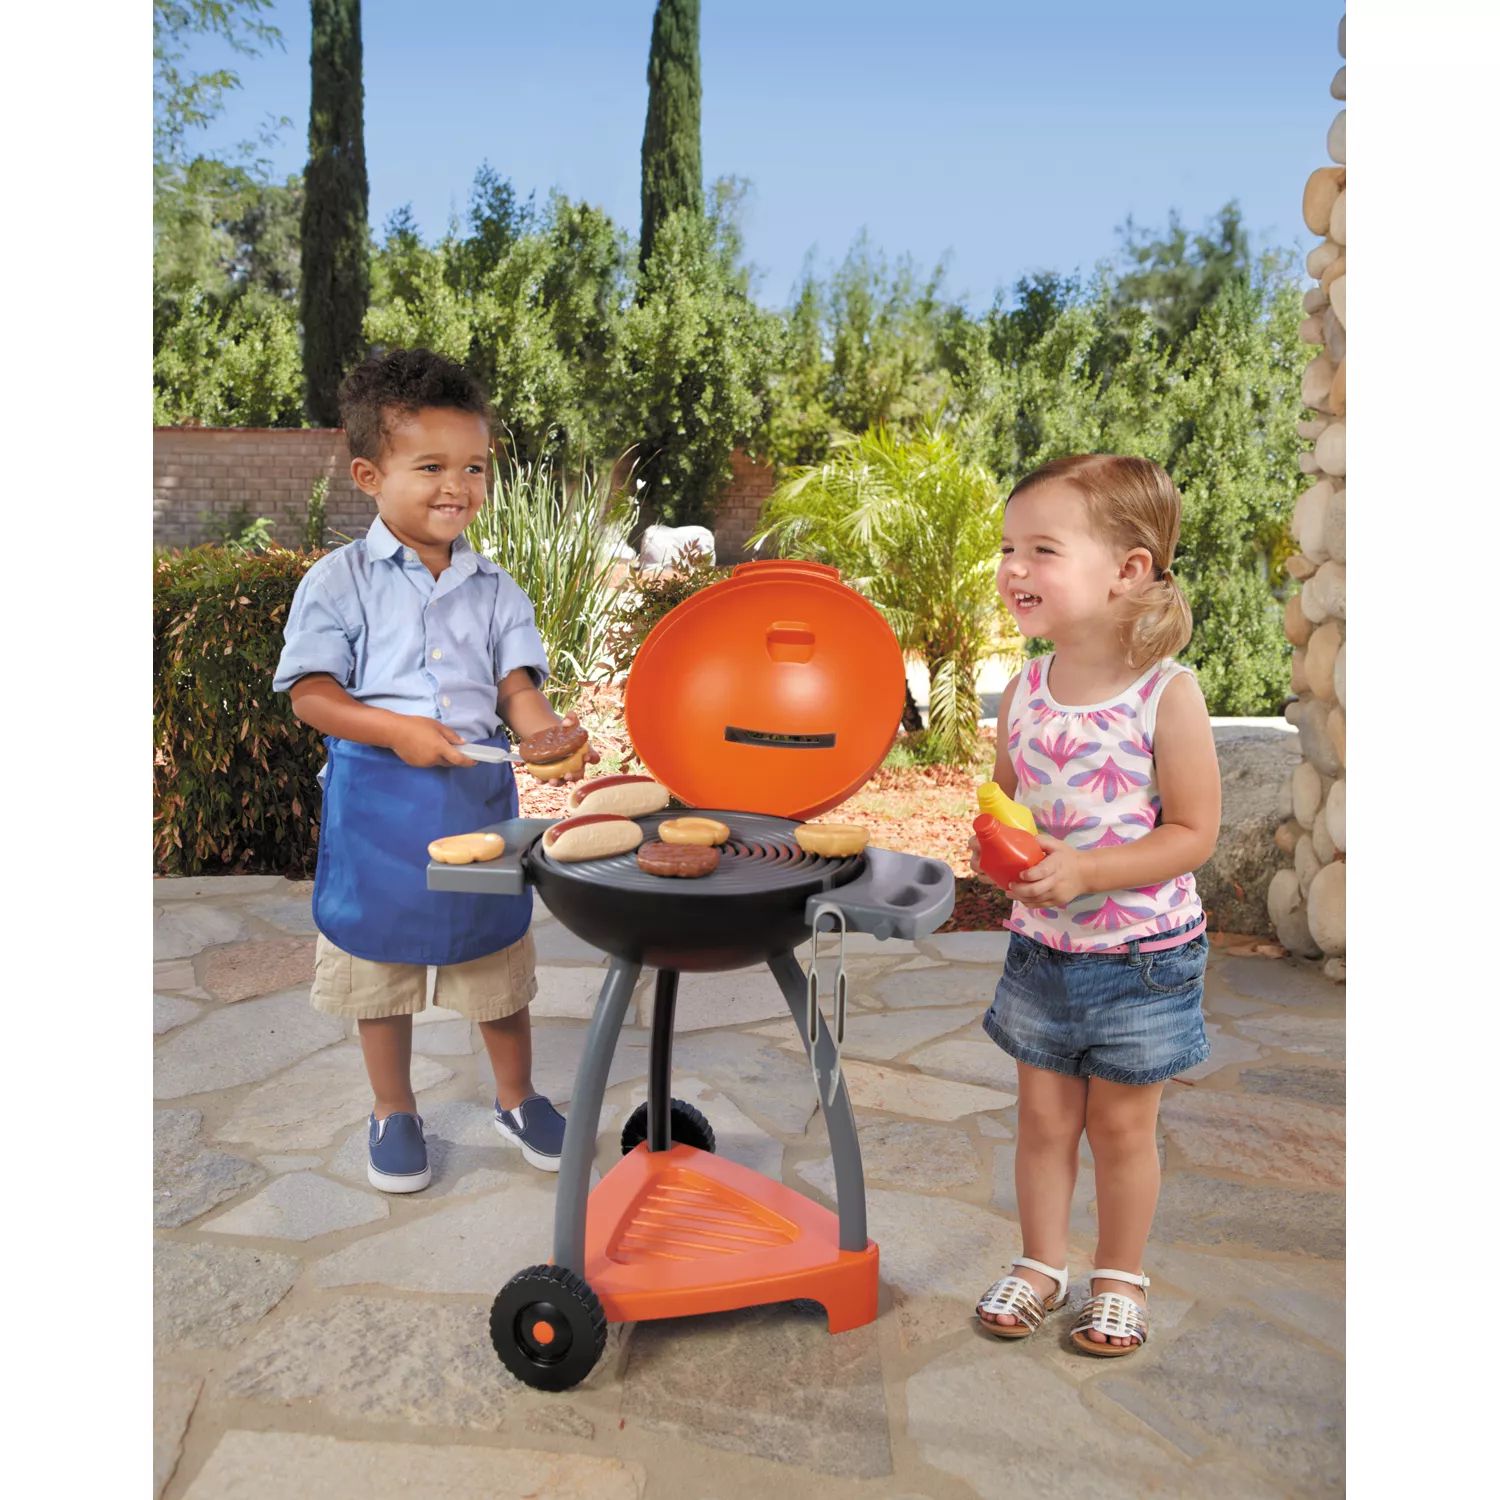 Little Tikes Sizzle 'n Serve Grill Little Tikes little tikes sklie outdoor toy